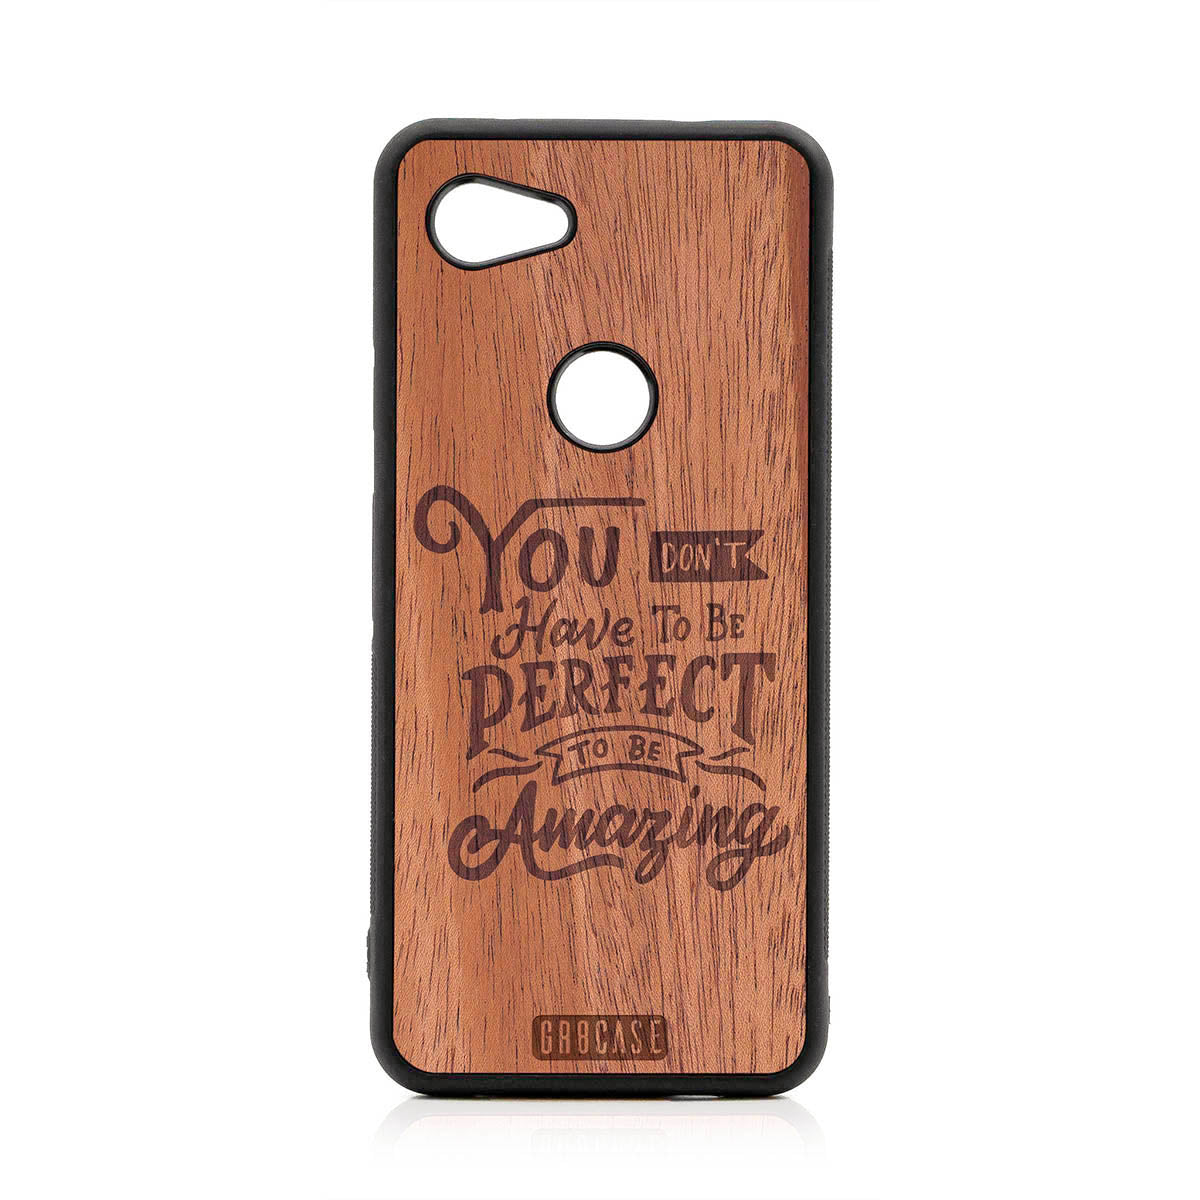 You Don't Have To Be Perfect To Be Amazing Design Wood Case For Google Pixel 3A XL